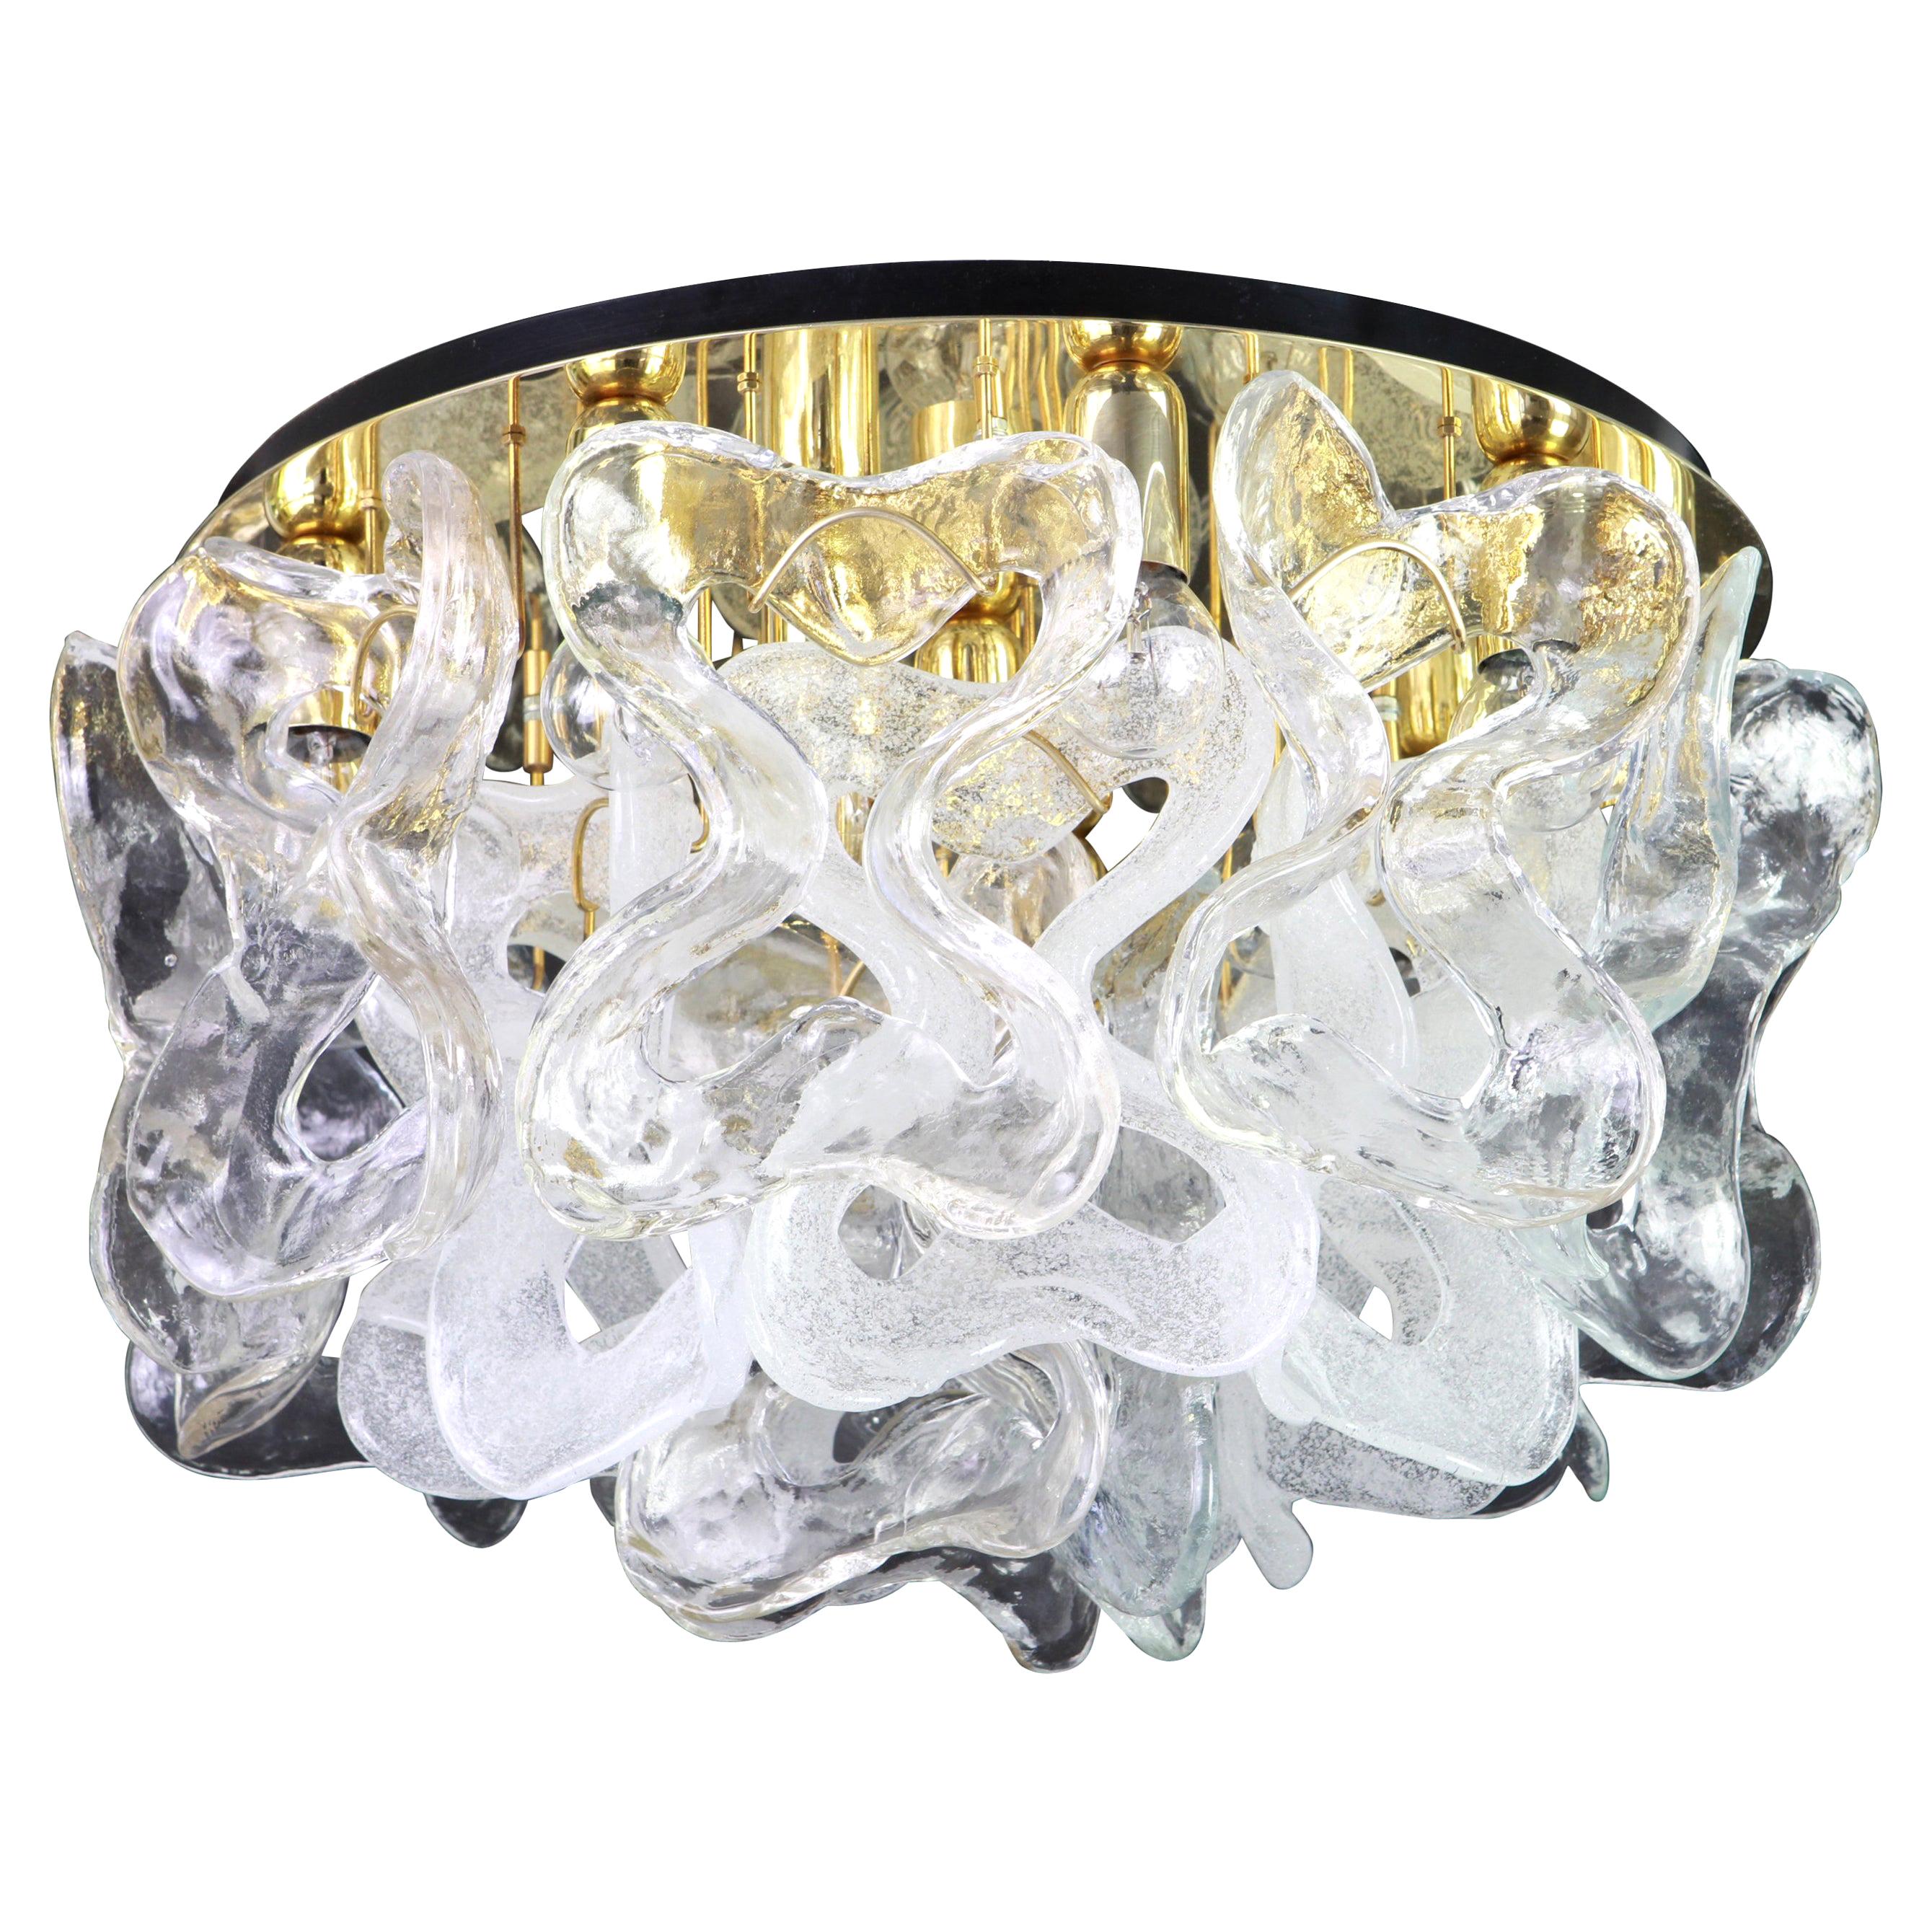 Large Catena Ceiling Fixture with Murano Glasses by Kalmar, Austria, 1960s